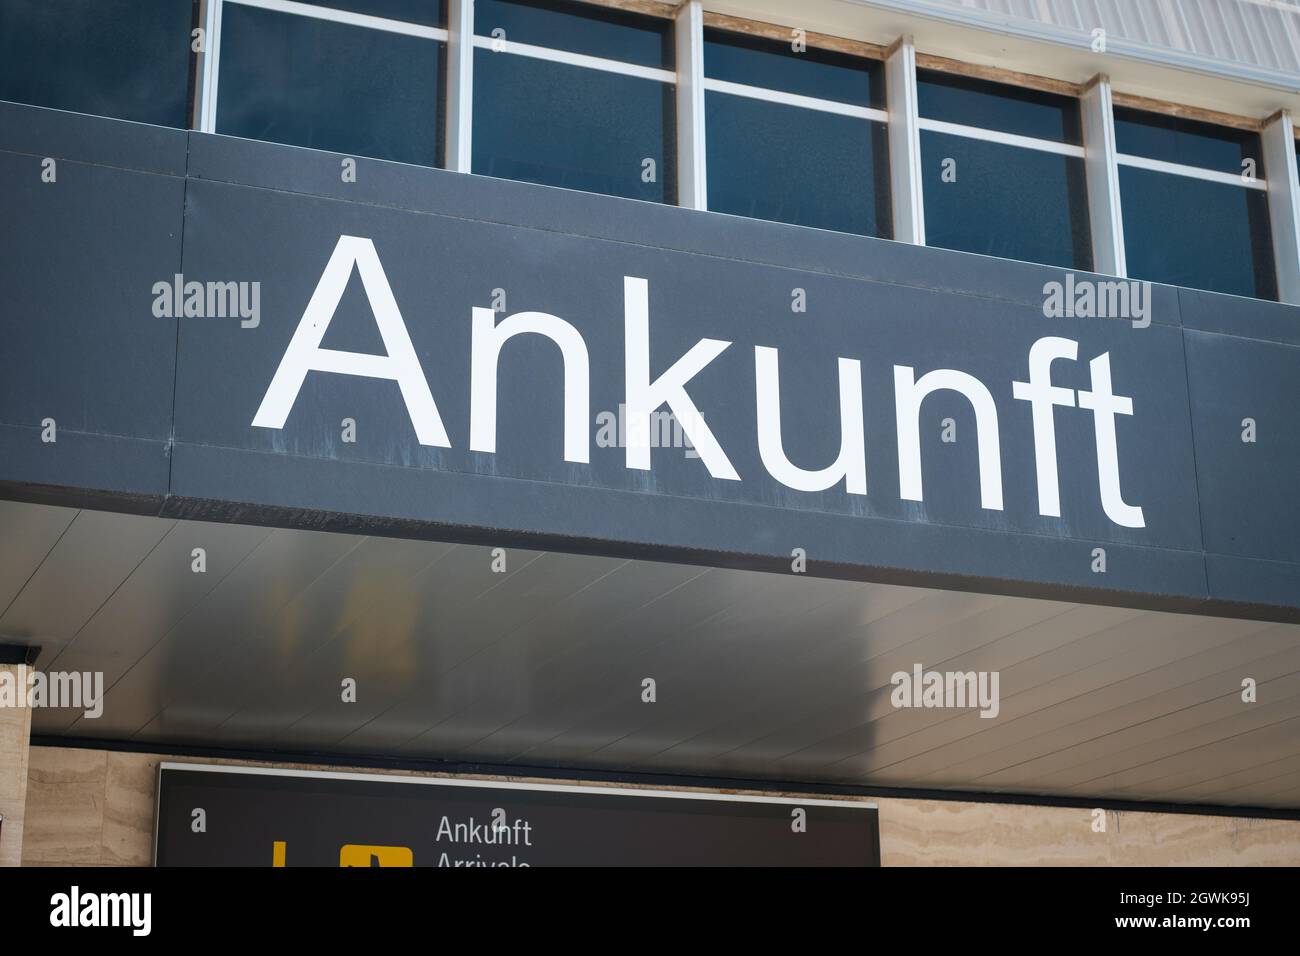 Tenerife, Spain - September, 2021: Arrivals gate sign at Airport (german: Ankunft) gate sign at Airport Stock Photo